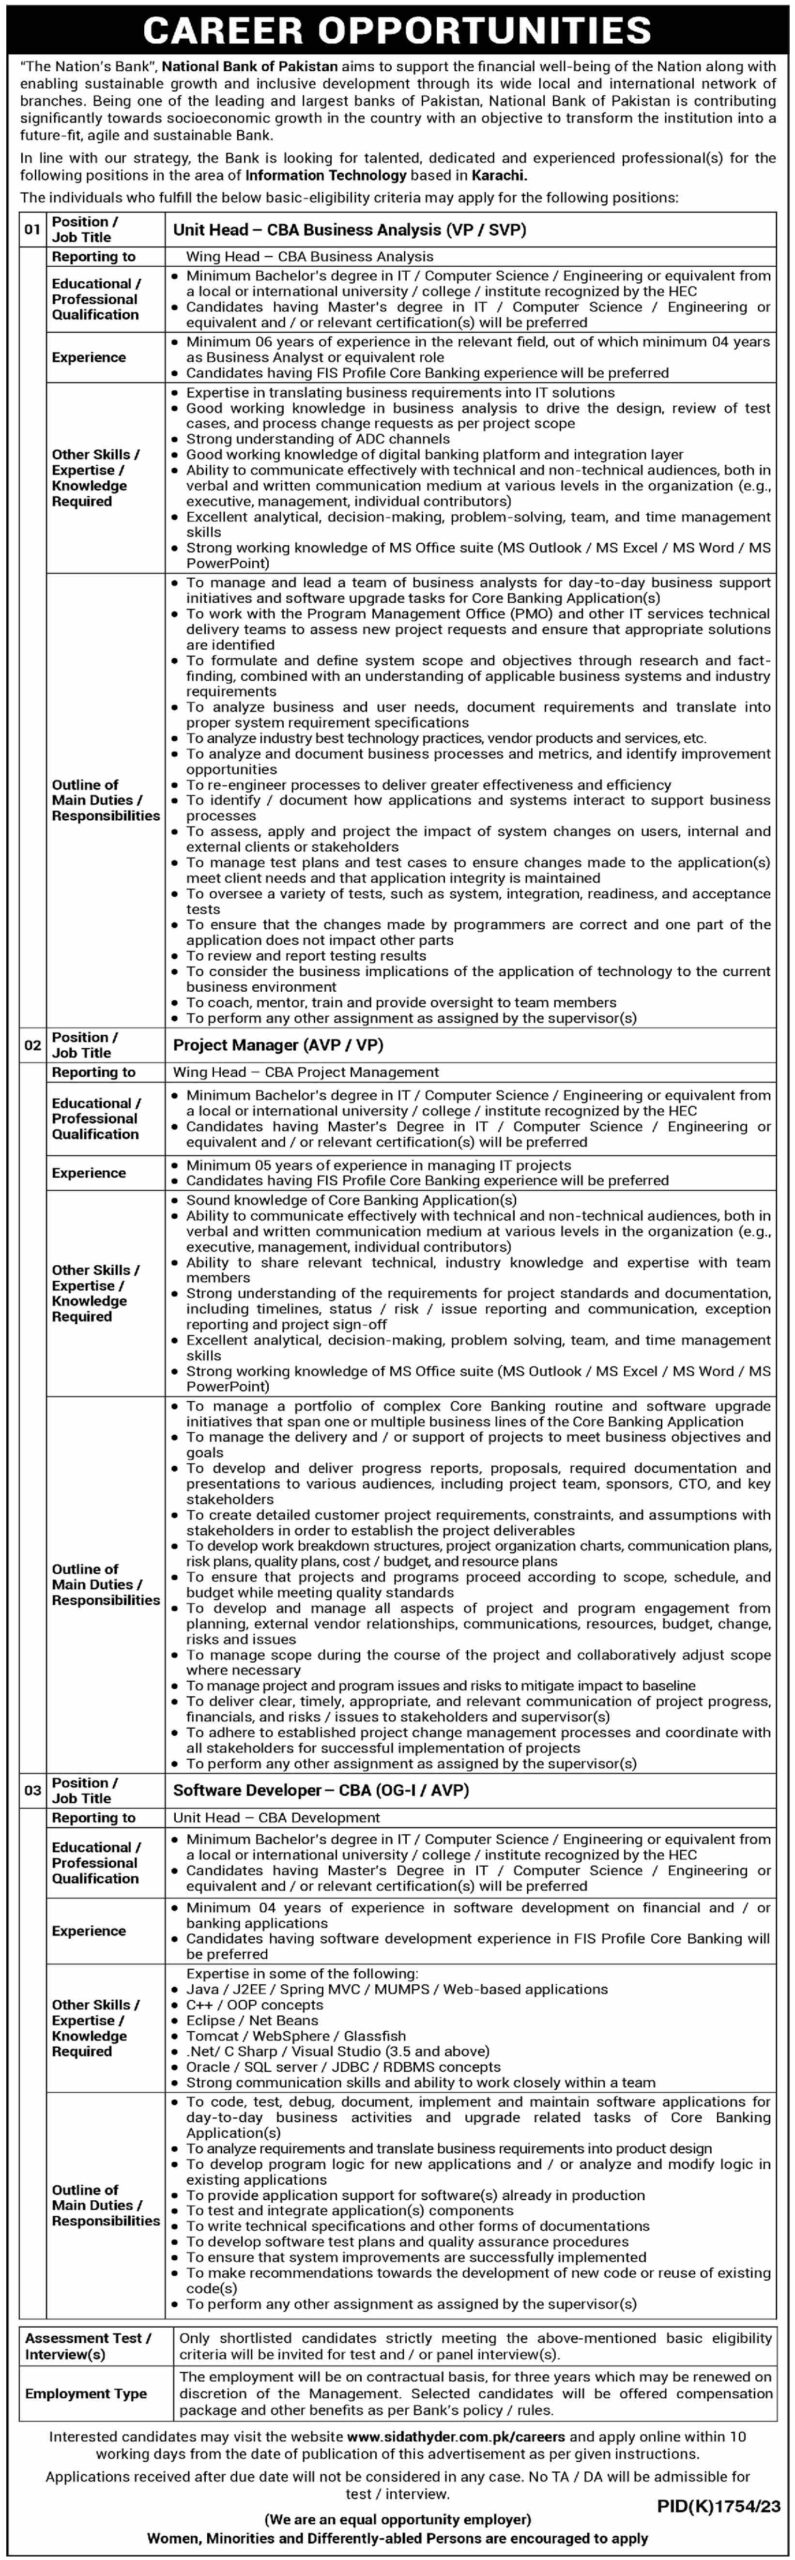 National Bank of Pakistan Information Technology Government Jobs in Karachi